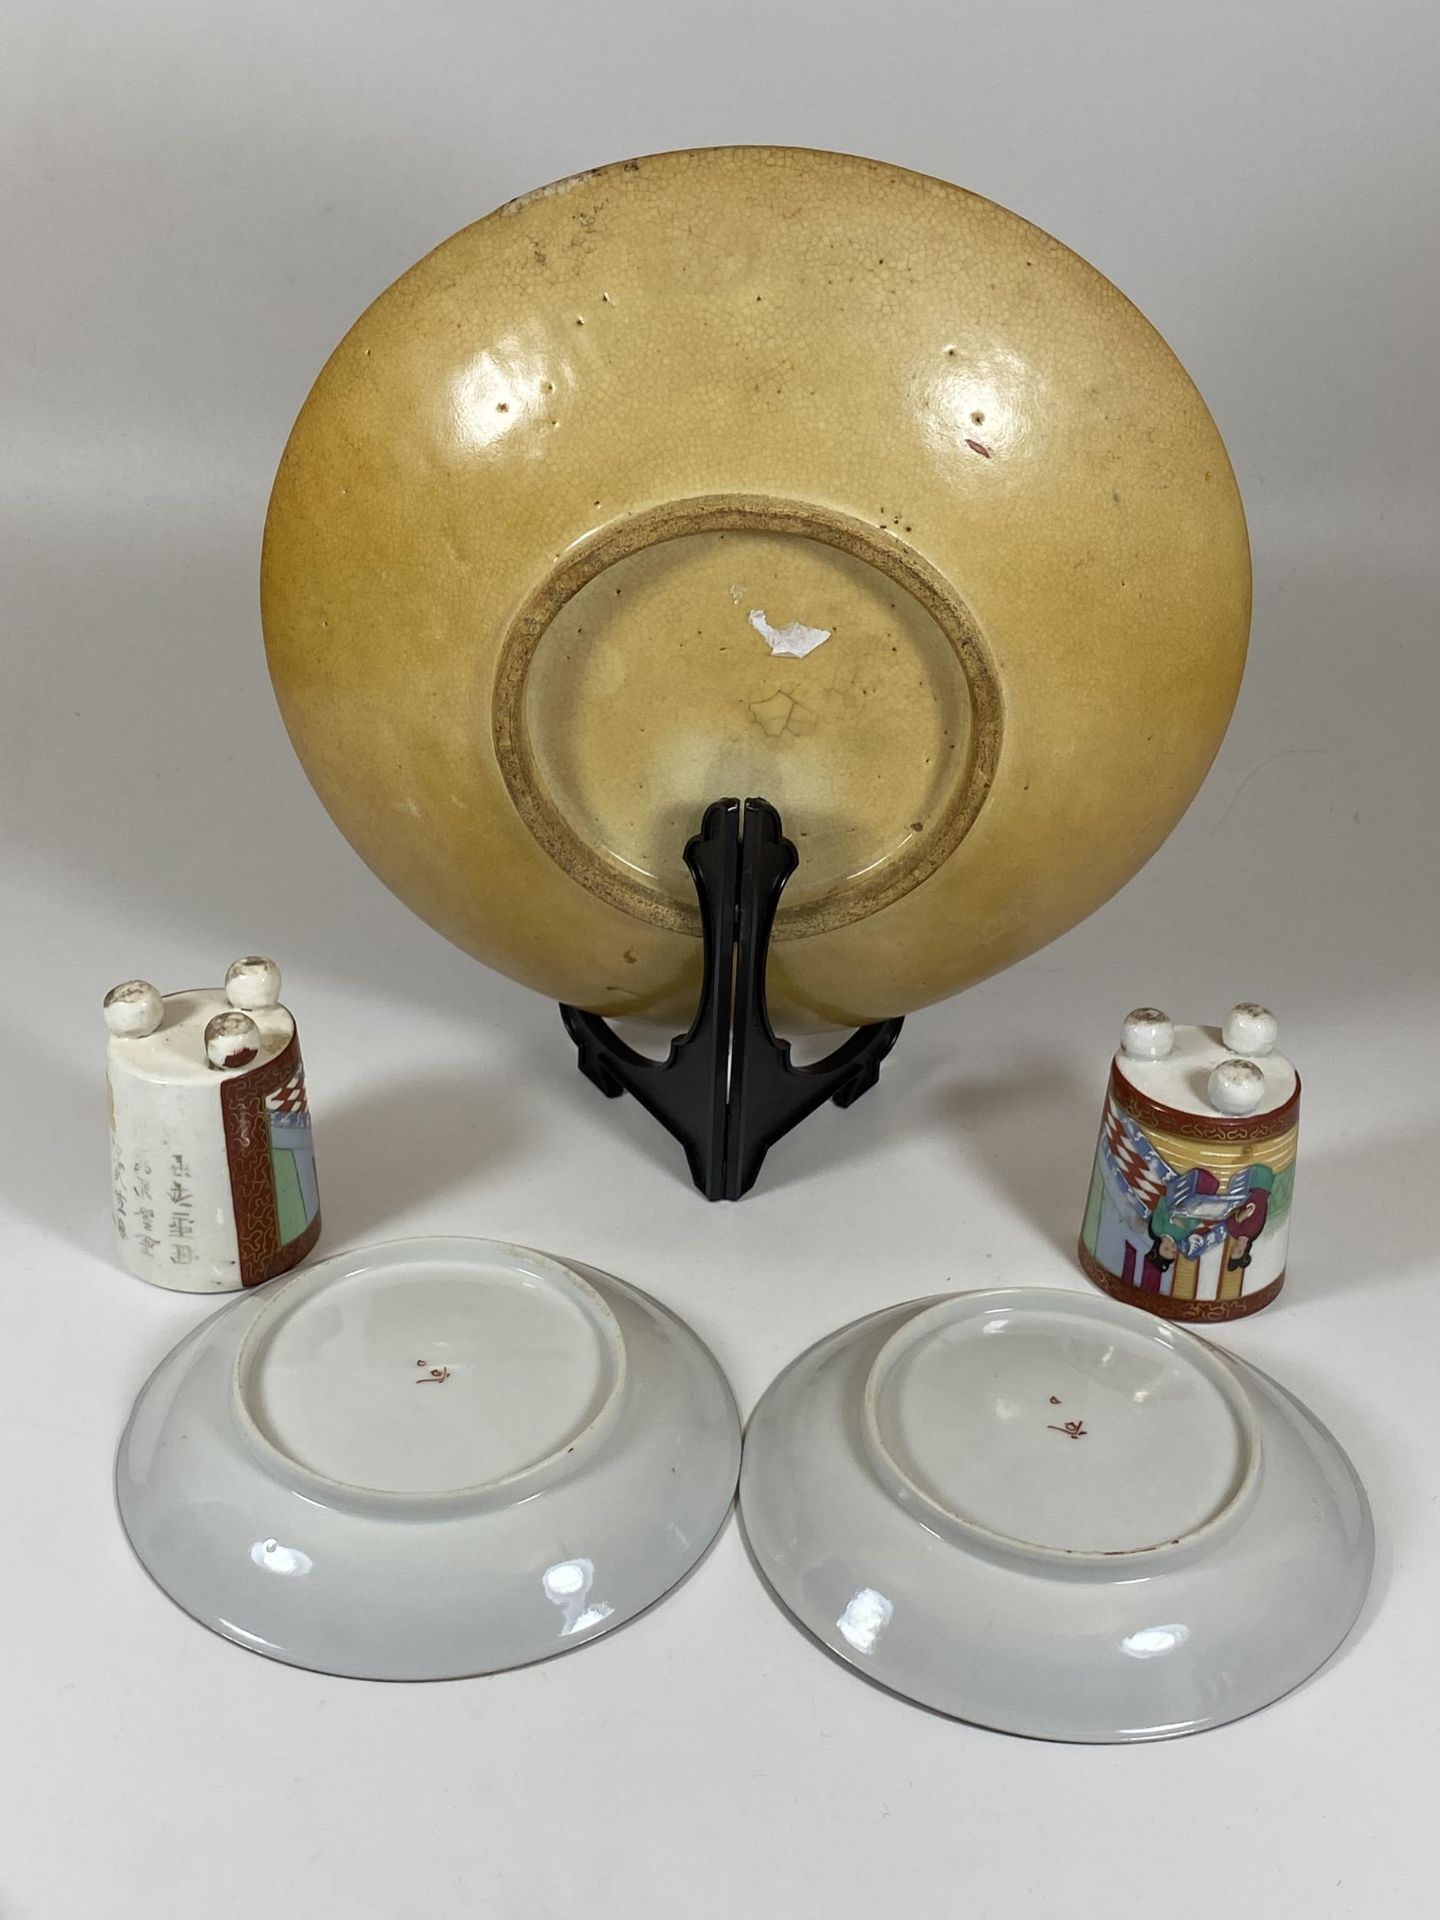 FIVE JAPANESE ITEMS - SATSUMA CHARGER / PLATE, PAIR OF POTS AND TWO KUTANI DISHES, PLATE DIAMETER - Image 5 of 6